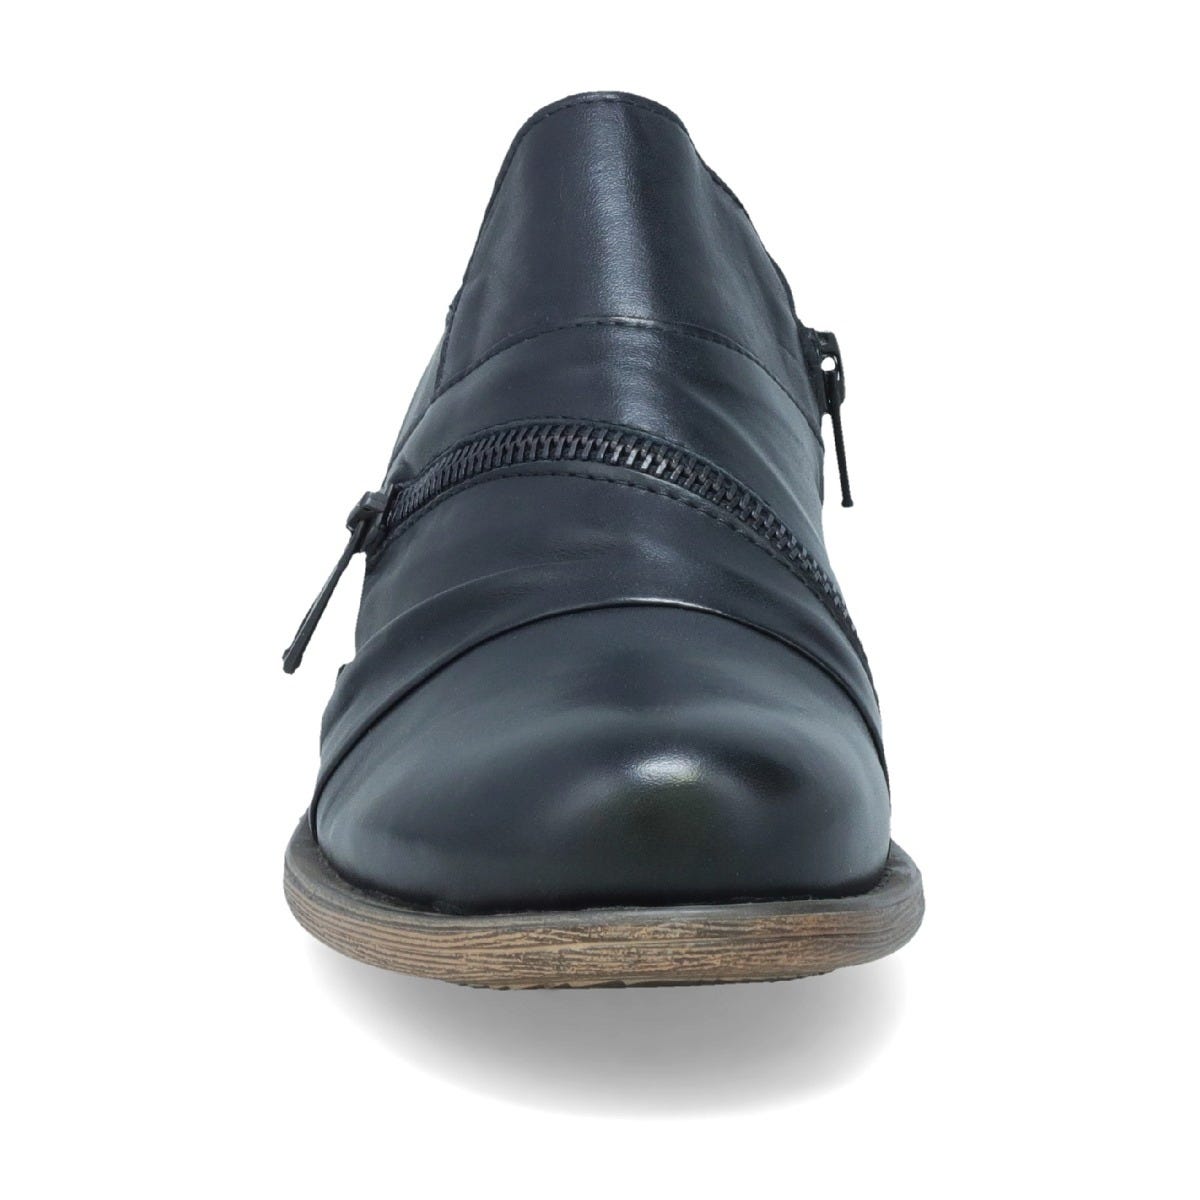 Front view of the miz mooz lyric oxford shoe. This flat shoe is a slip on. It is black with a decorative zipper over the instep.